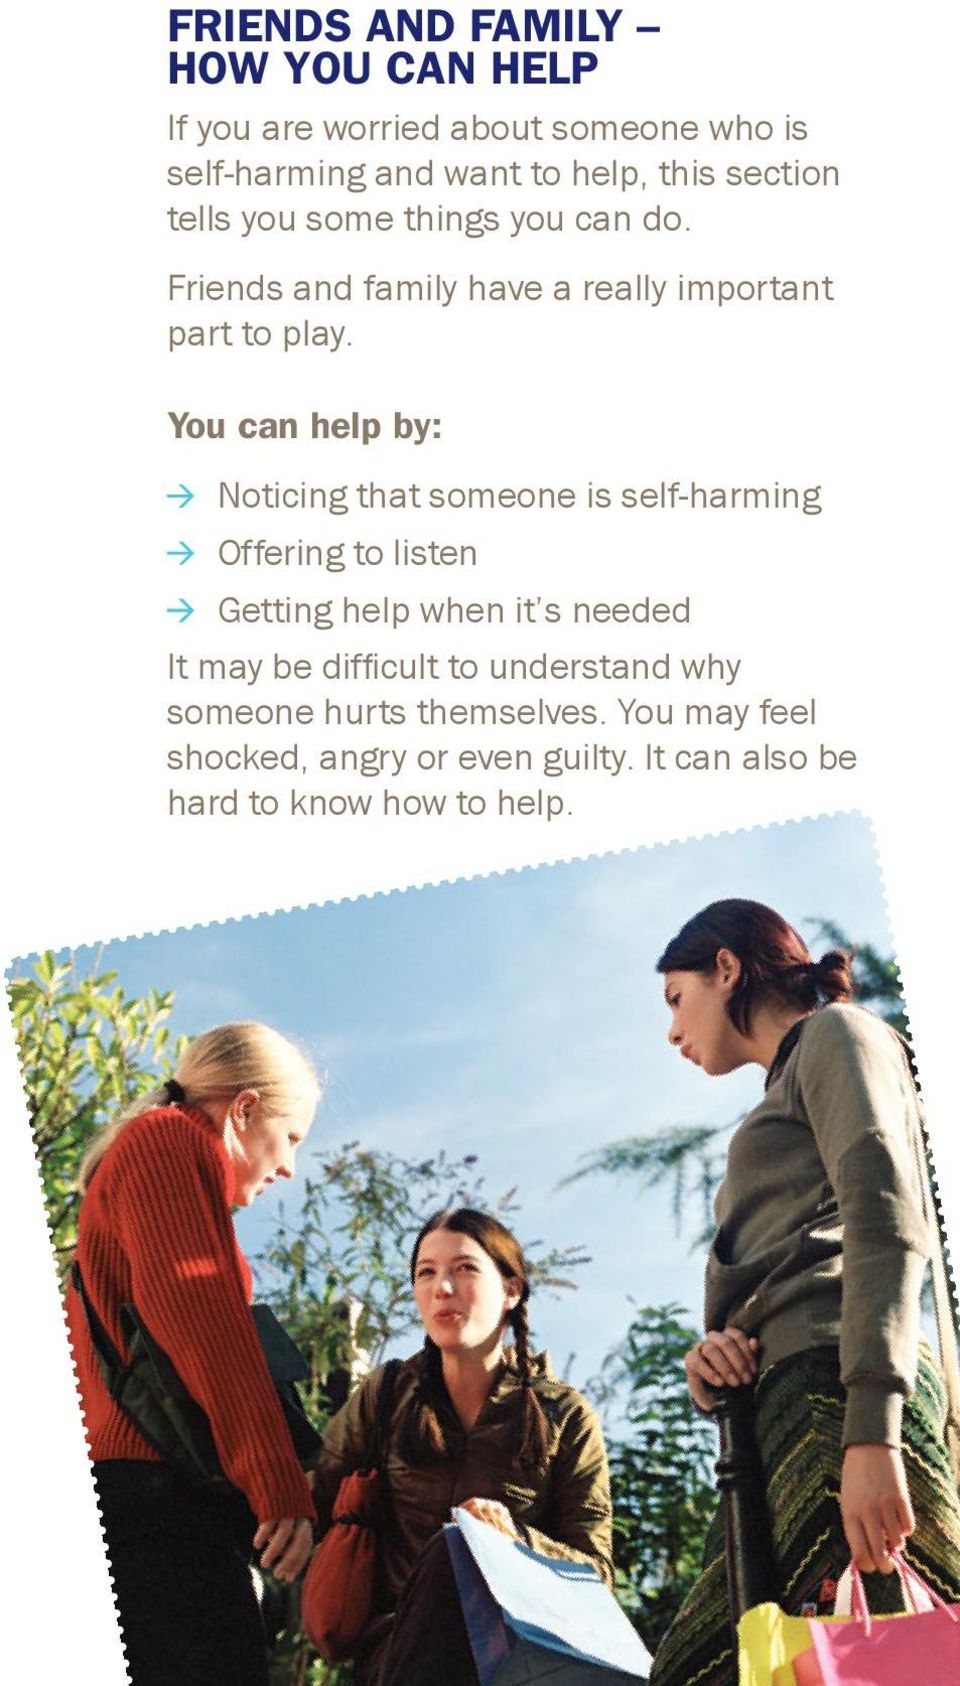 You can help by: Noticing that someone is self-harming Offering to listen Getting help when it s needed It may be